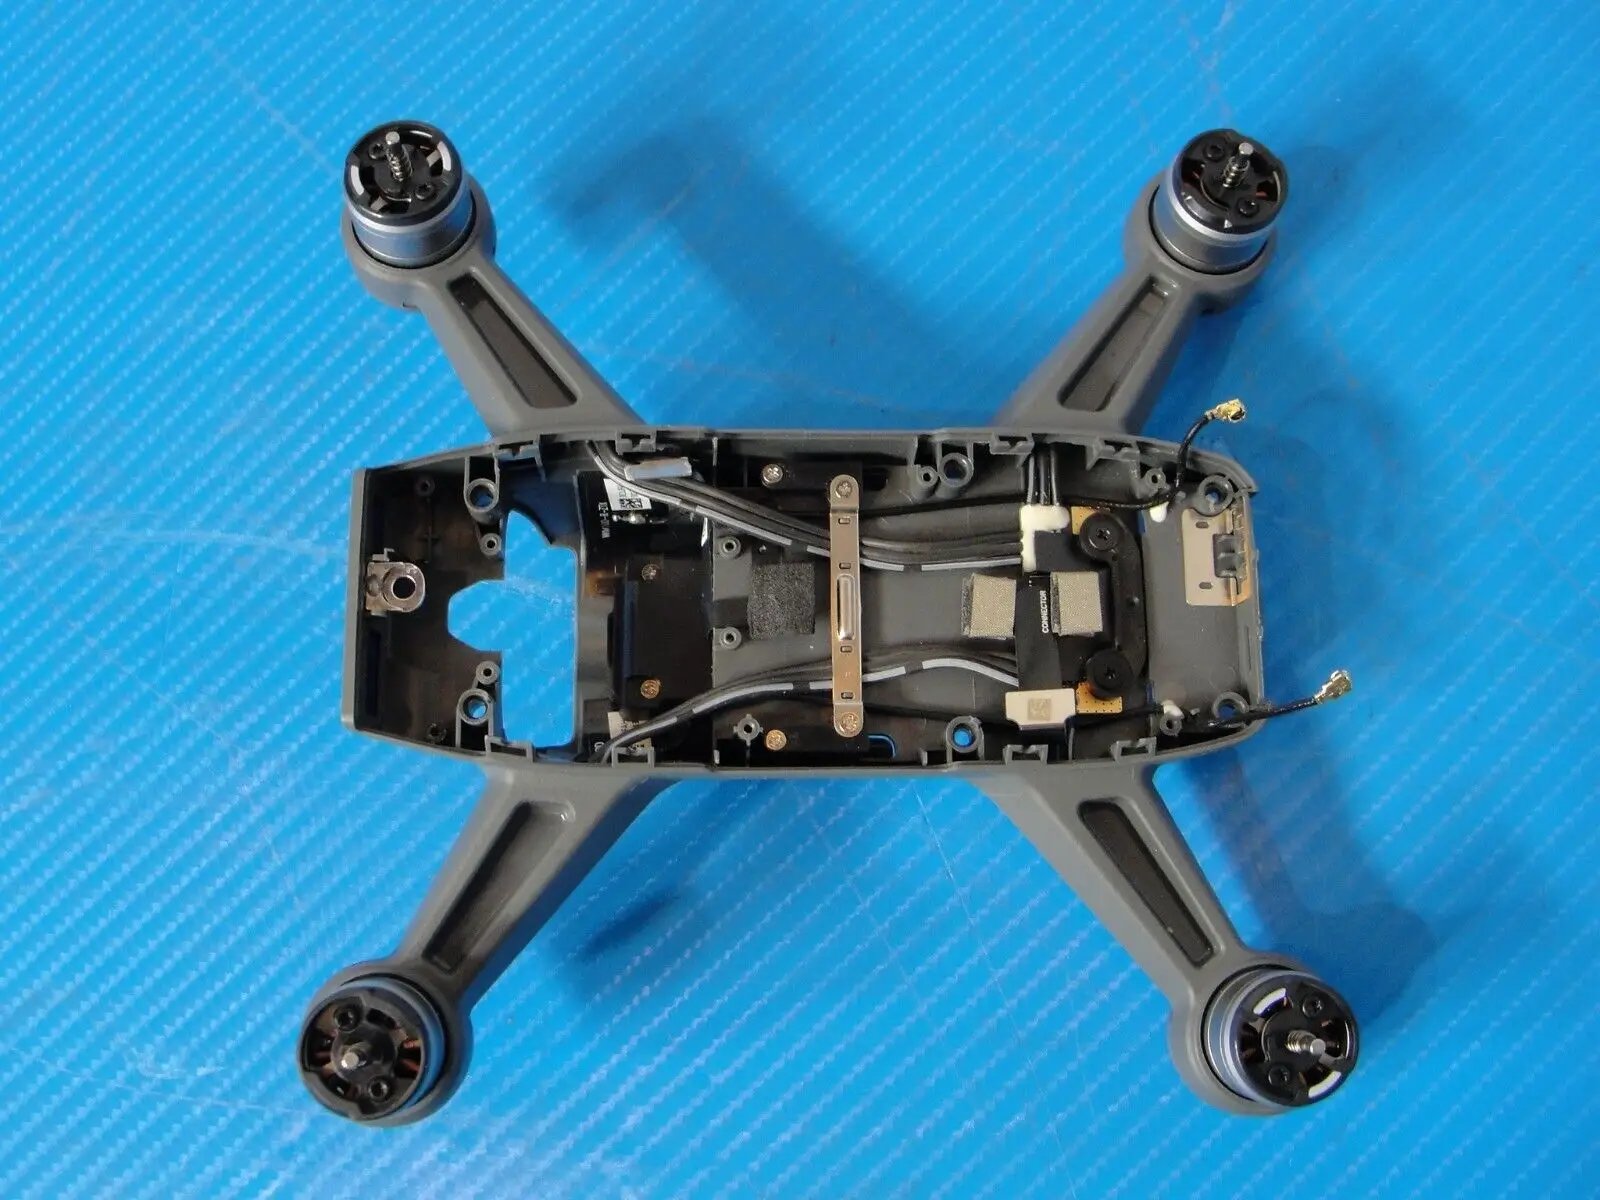 DJI Spark MM1A Drone Genuine Frame Body Shell with ESC Board and 4 Motors Good